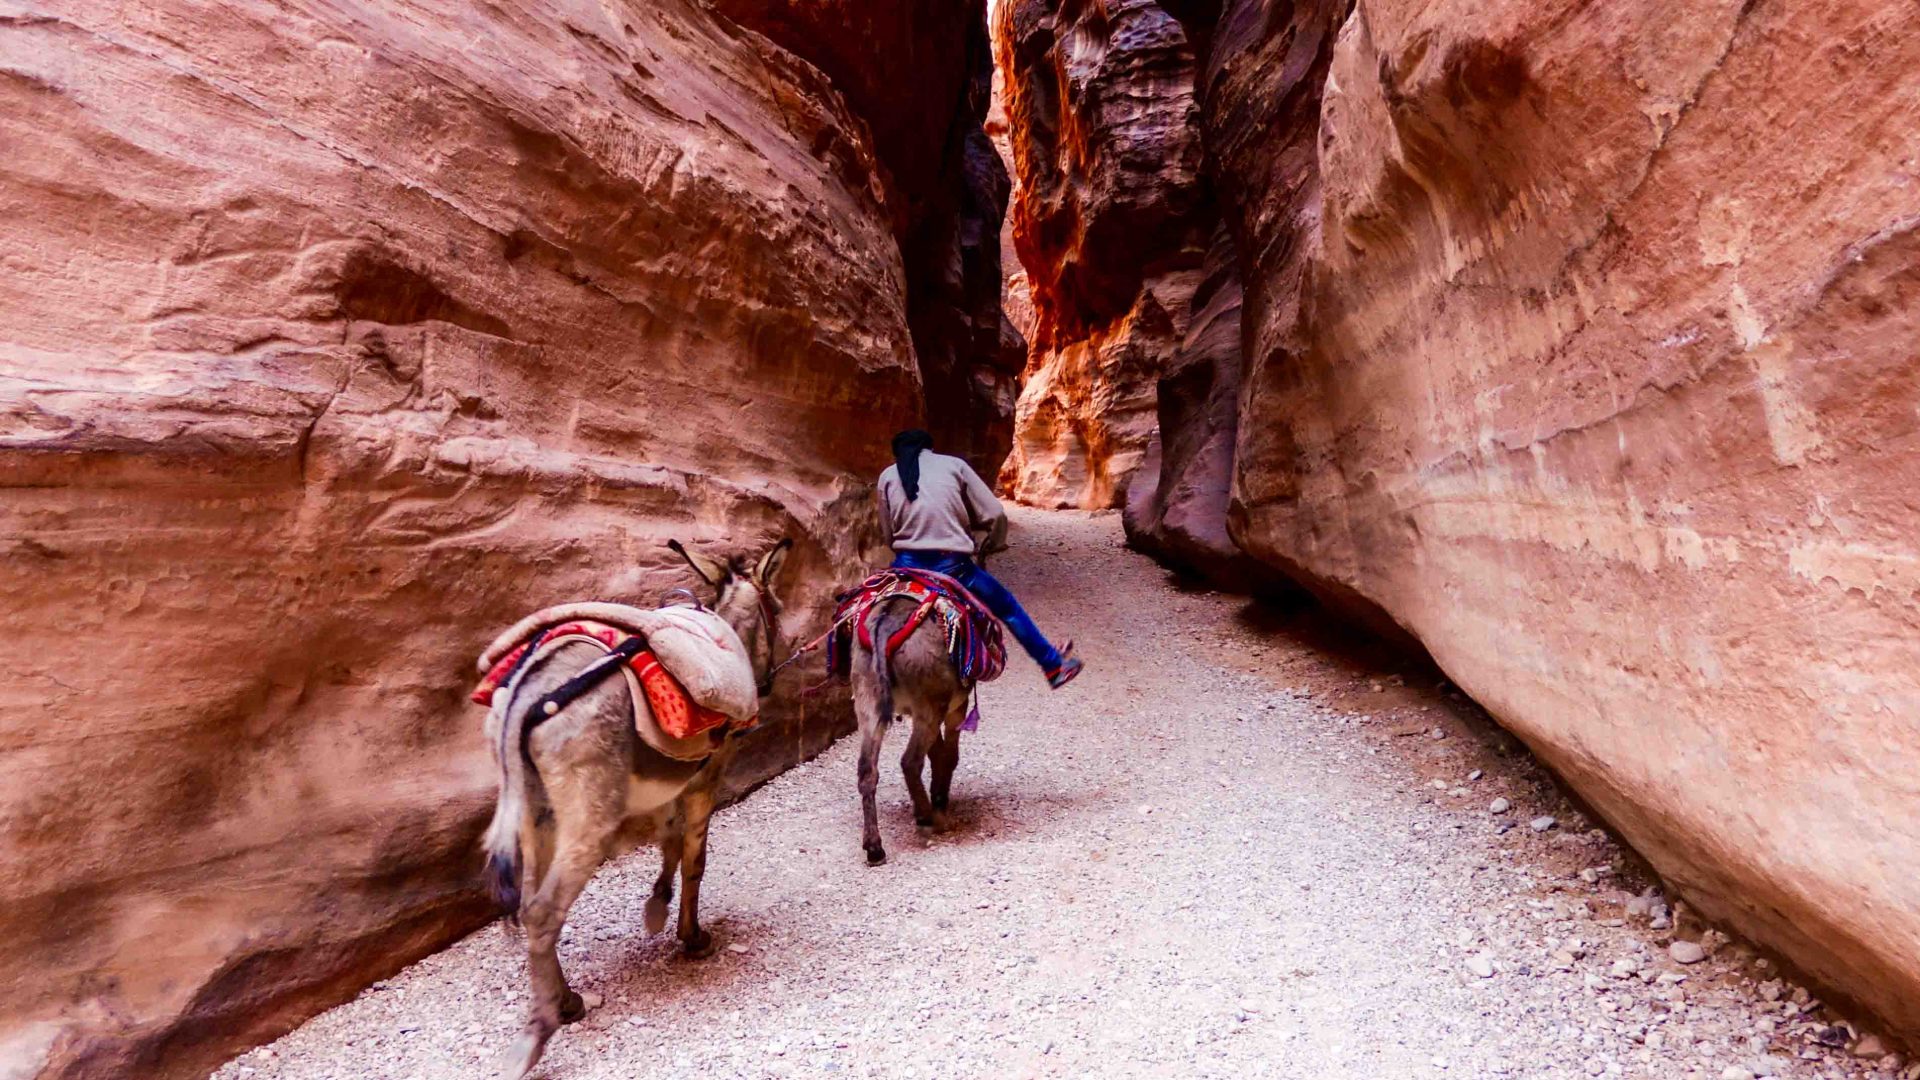 A donkey is lead through the crevice in the rock at Petra in Jordan.